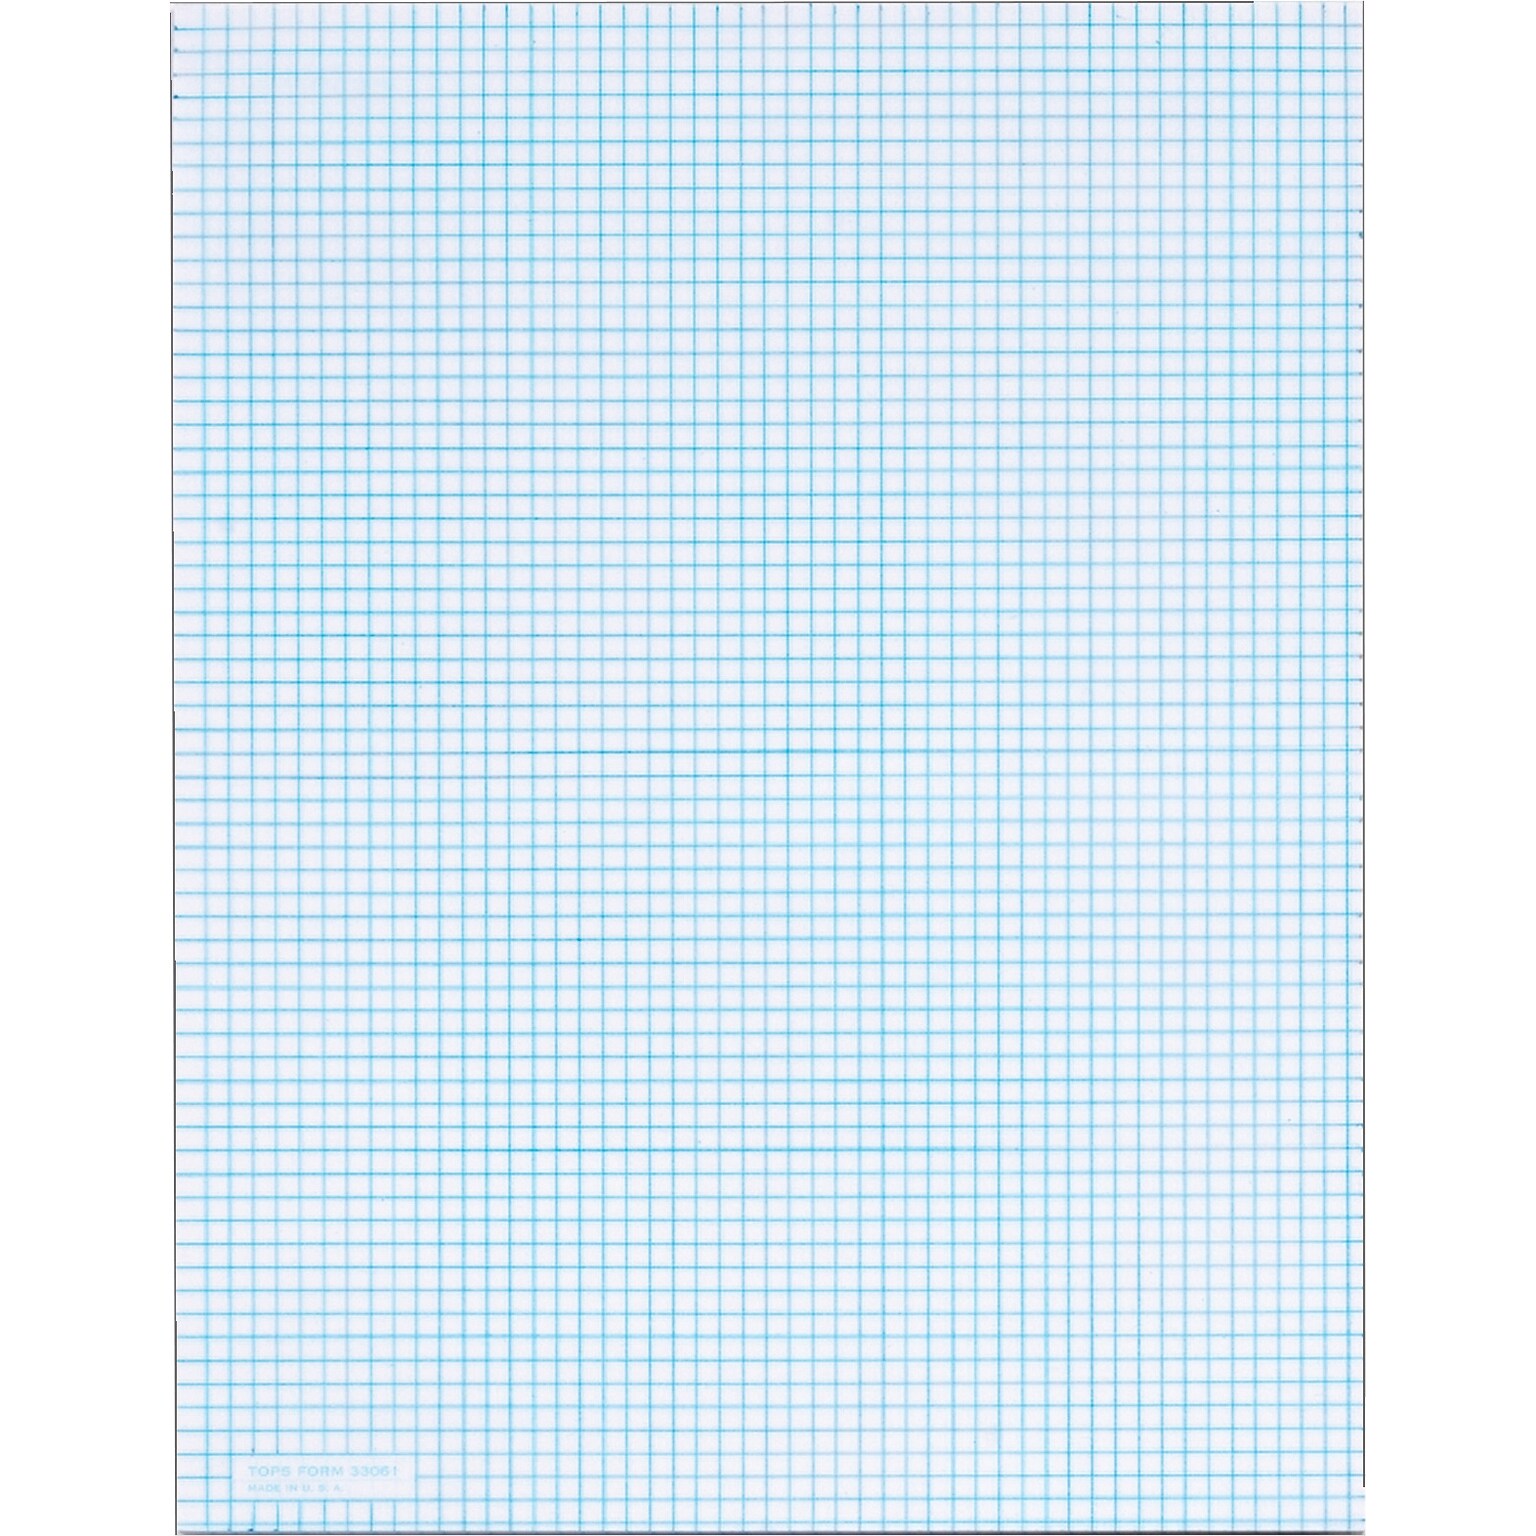 TOPS Notepad, 8.5 x 11, Graph Ruled, White, 50 Sheets/Pad (33061)